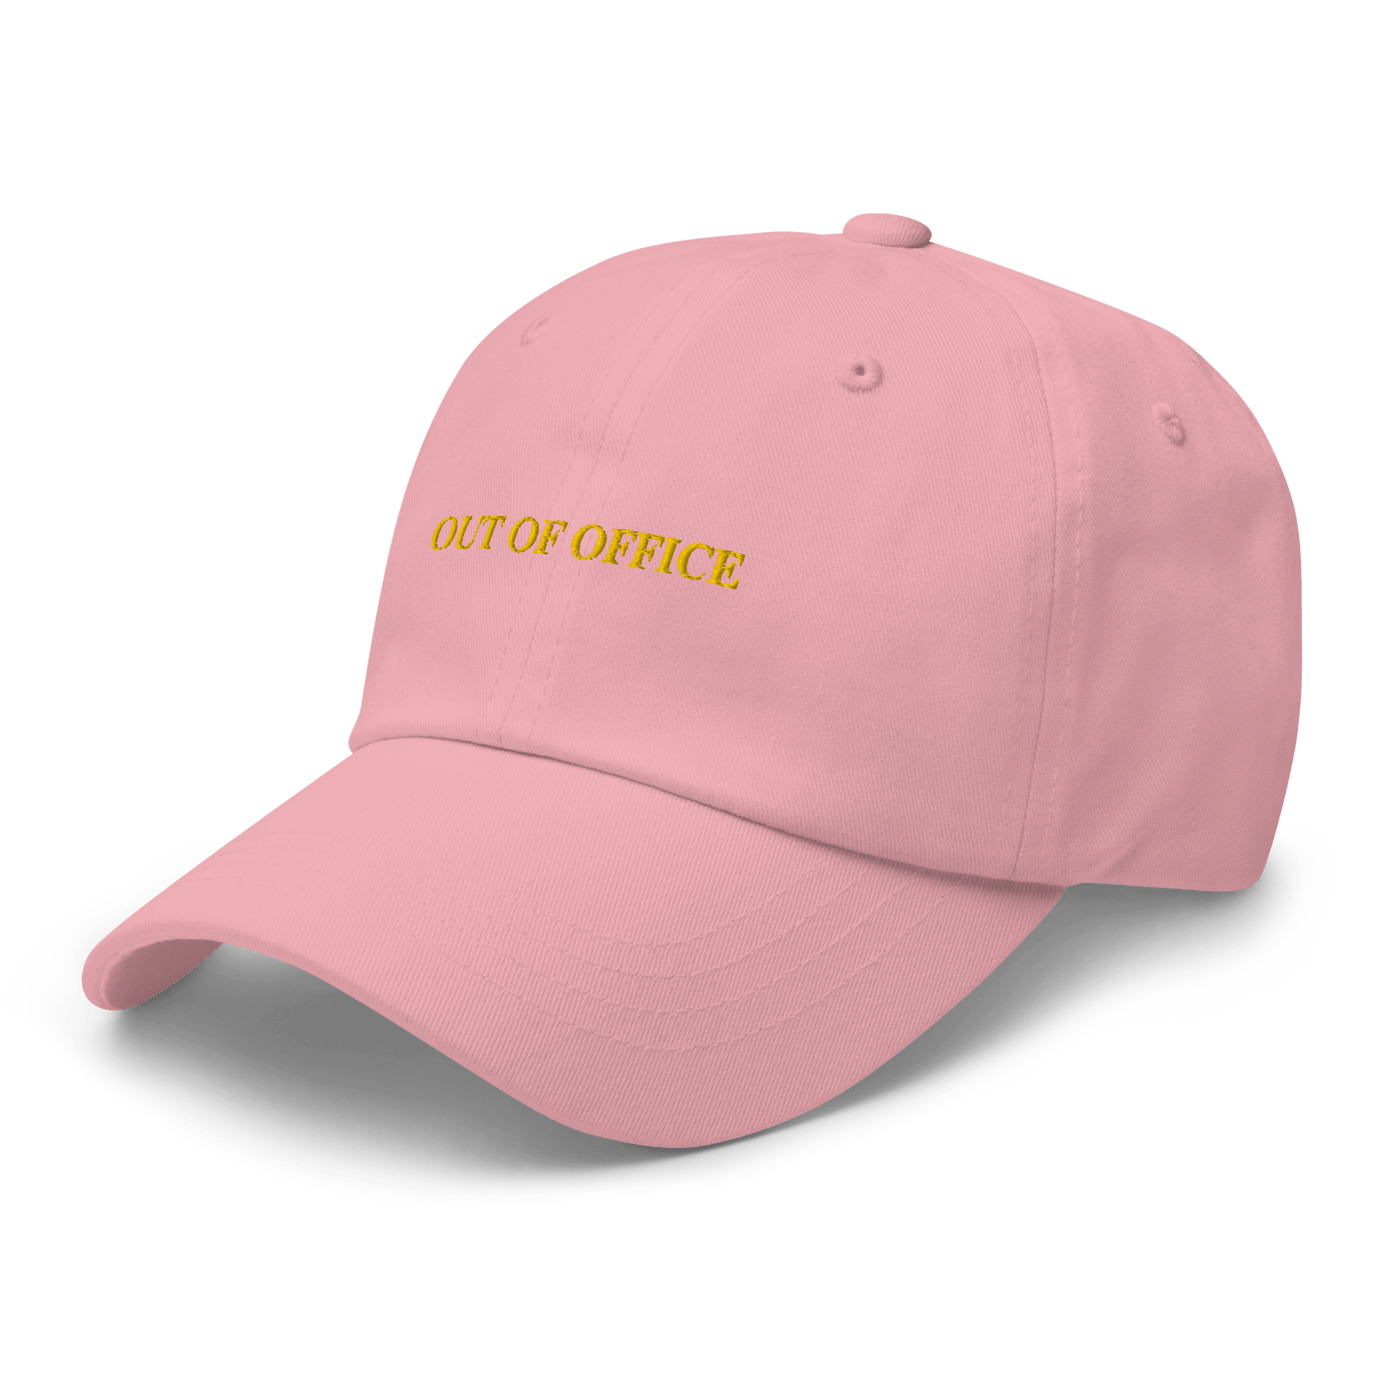 OUT OF OFFICE Dad hat - Pink - - Just Another Cap Store